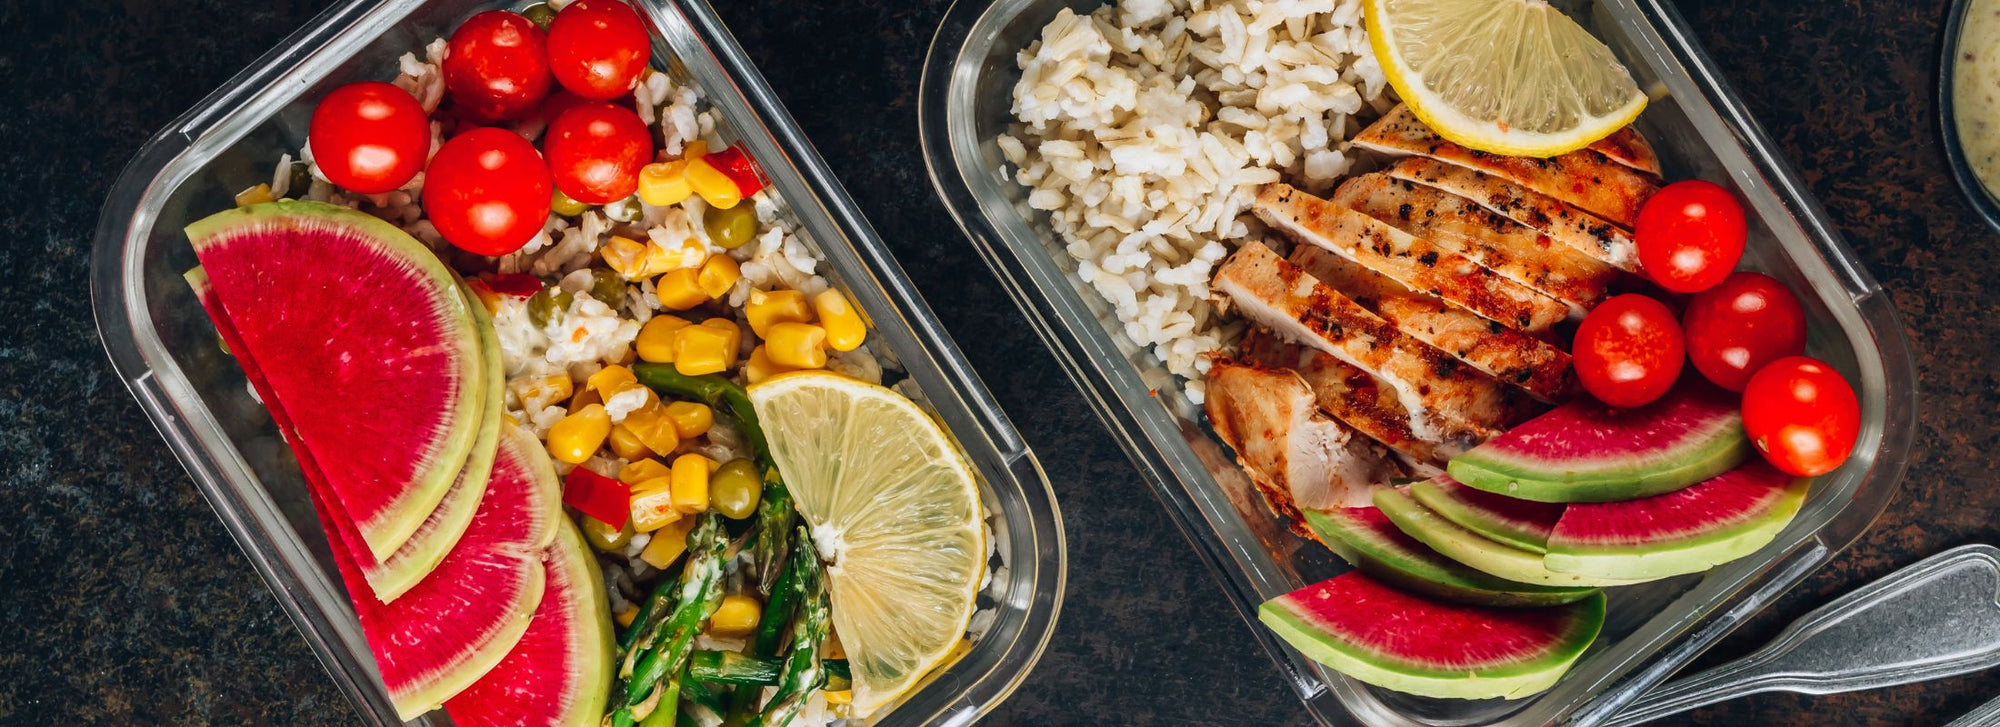 From Gym to Plate: MusclePharm's Guide to Post-Workout Nutrition